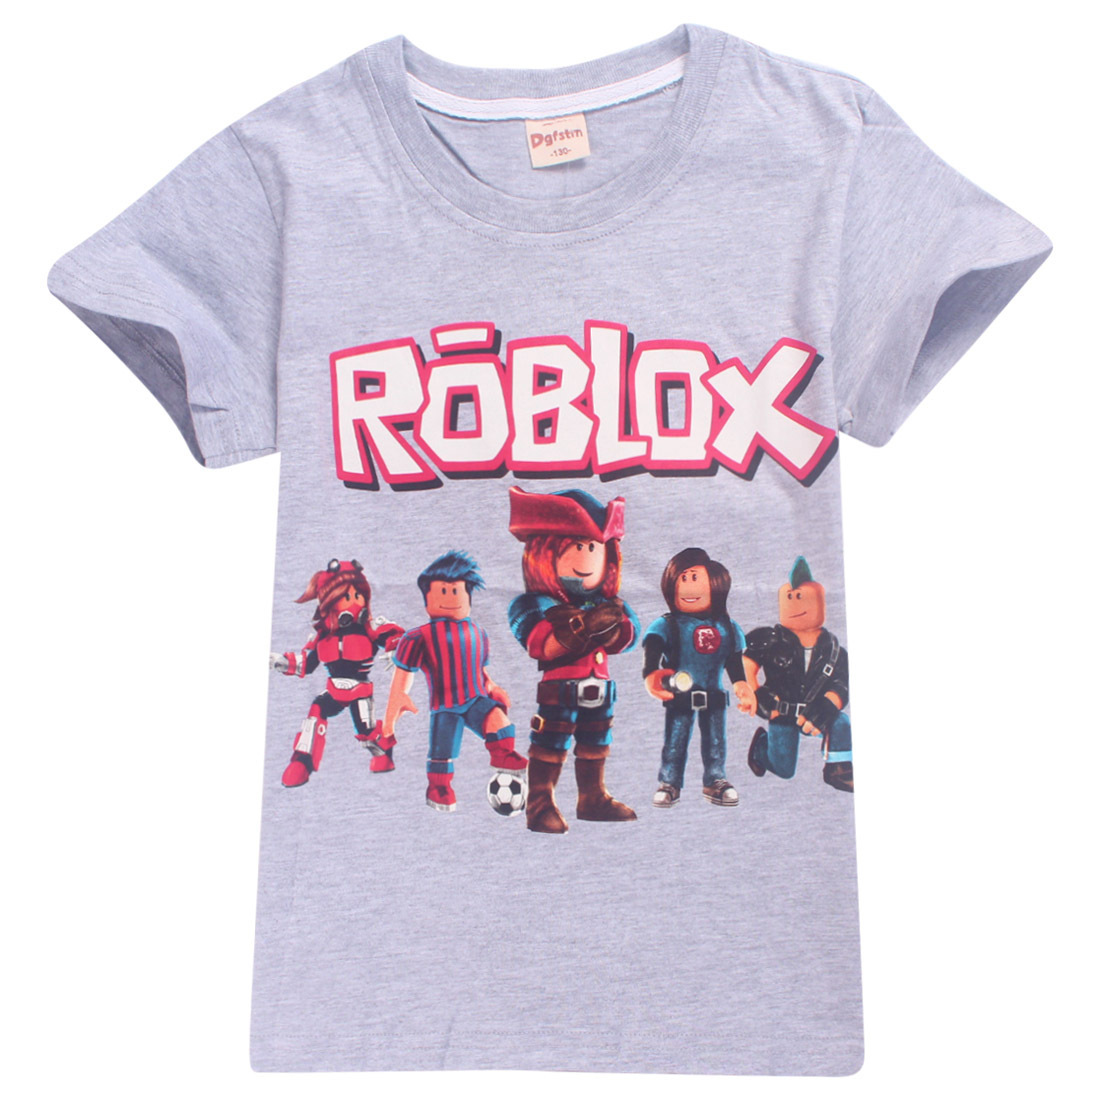 Roblox Theme Colorful Series Grey Kids And 50 Similar Items - roblox theme colorful series black kids and 50 similar items